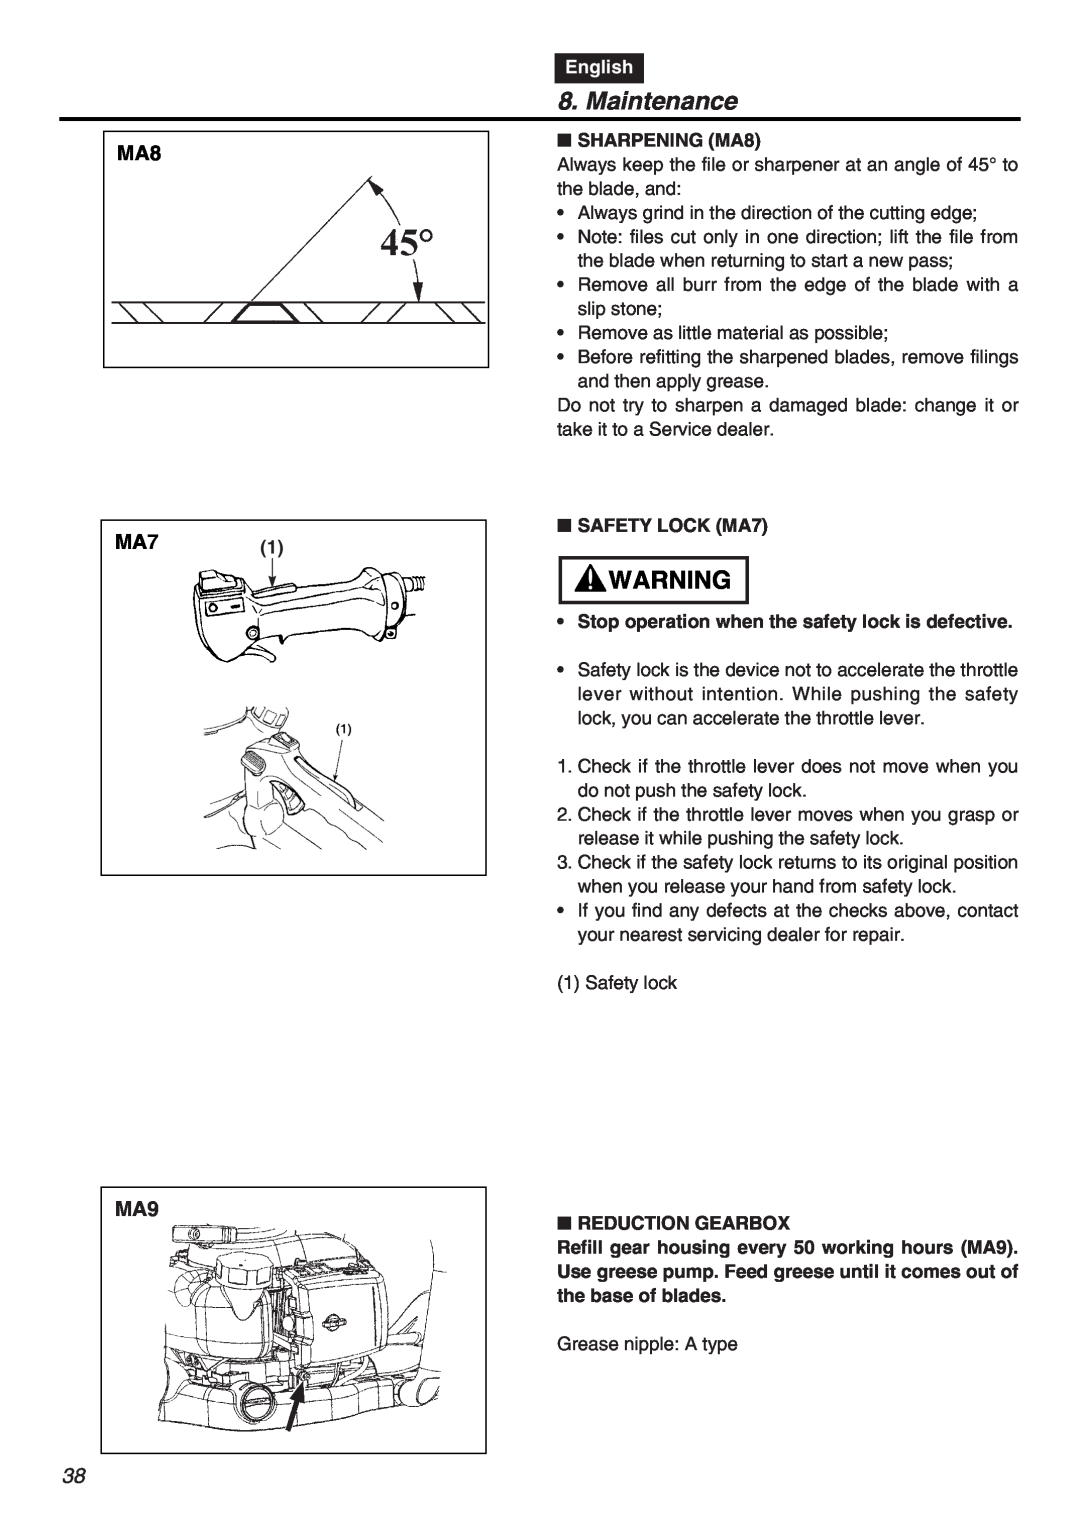 RedMax CHTZ2401-CA Maintenance, English, SHARPENING MA8, SAFETY LOCK MA7, Stop operation when the safety lock is defective 